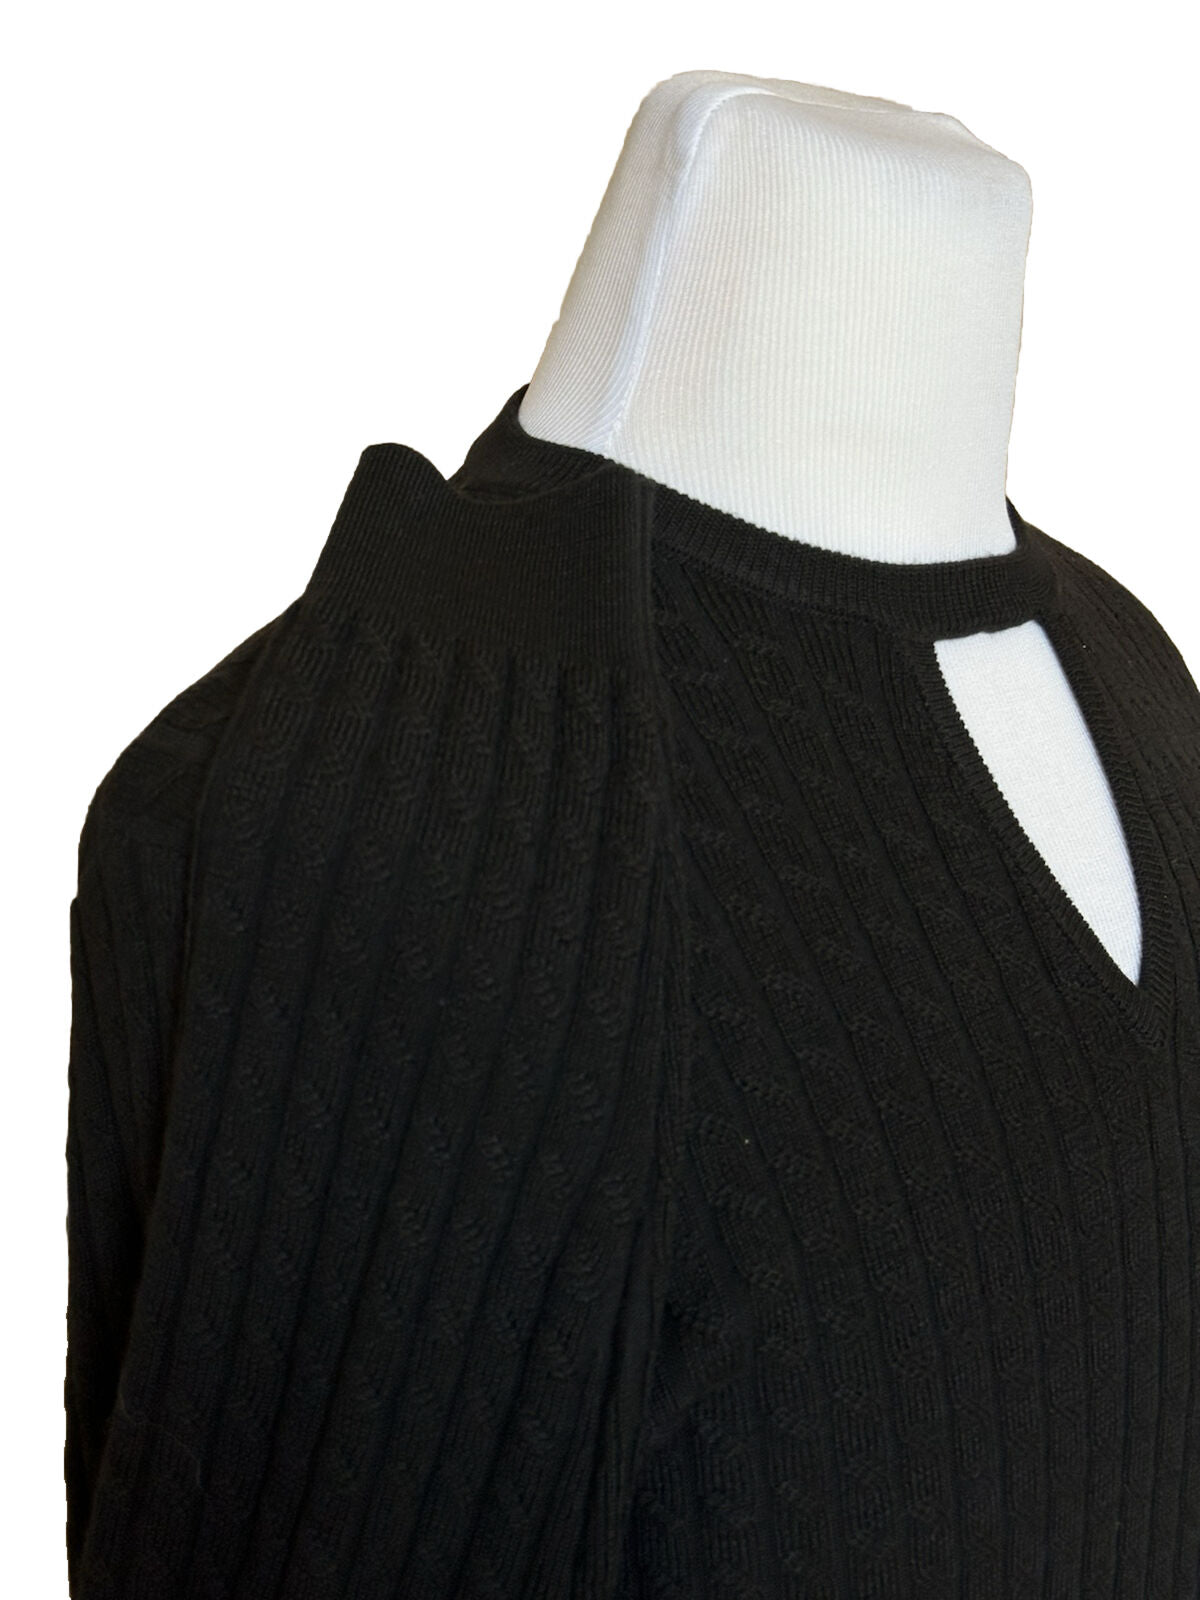 NWT $1250 Fendi Wool Knit Pullover Sweater Black 54 Euro FZX077 Made in Italy